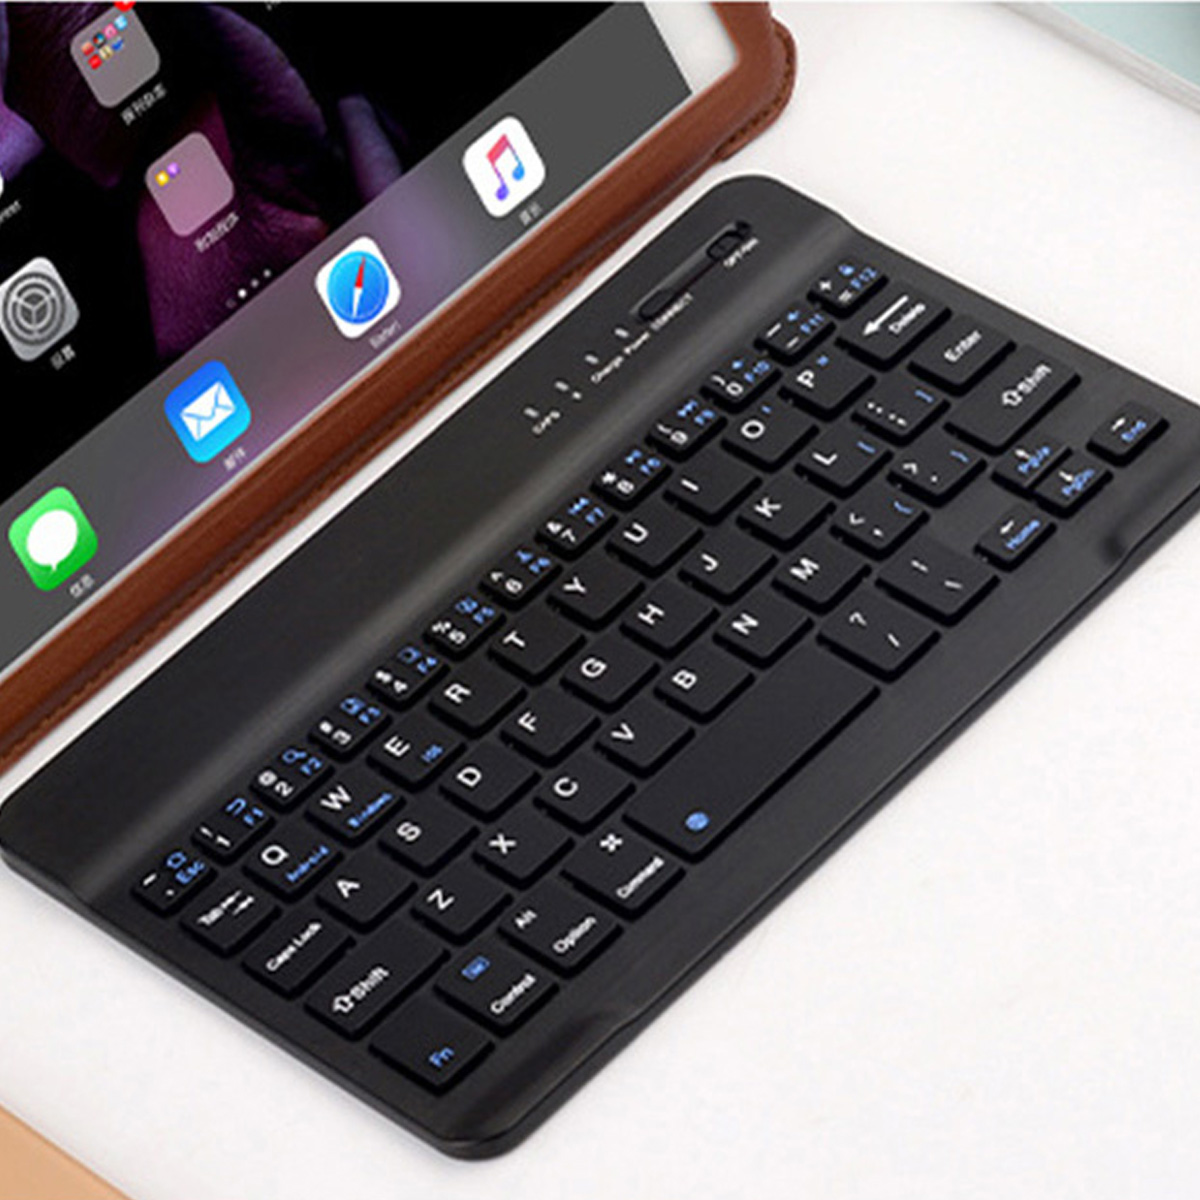 Bakeey-79-inch-Mini-Portable-Wireless-bluetooth-30-Charging-Keyboard-for-ipad-Tablet-Phone-Android-1633647-12